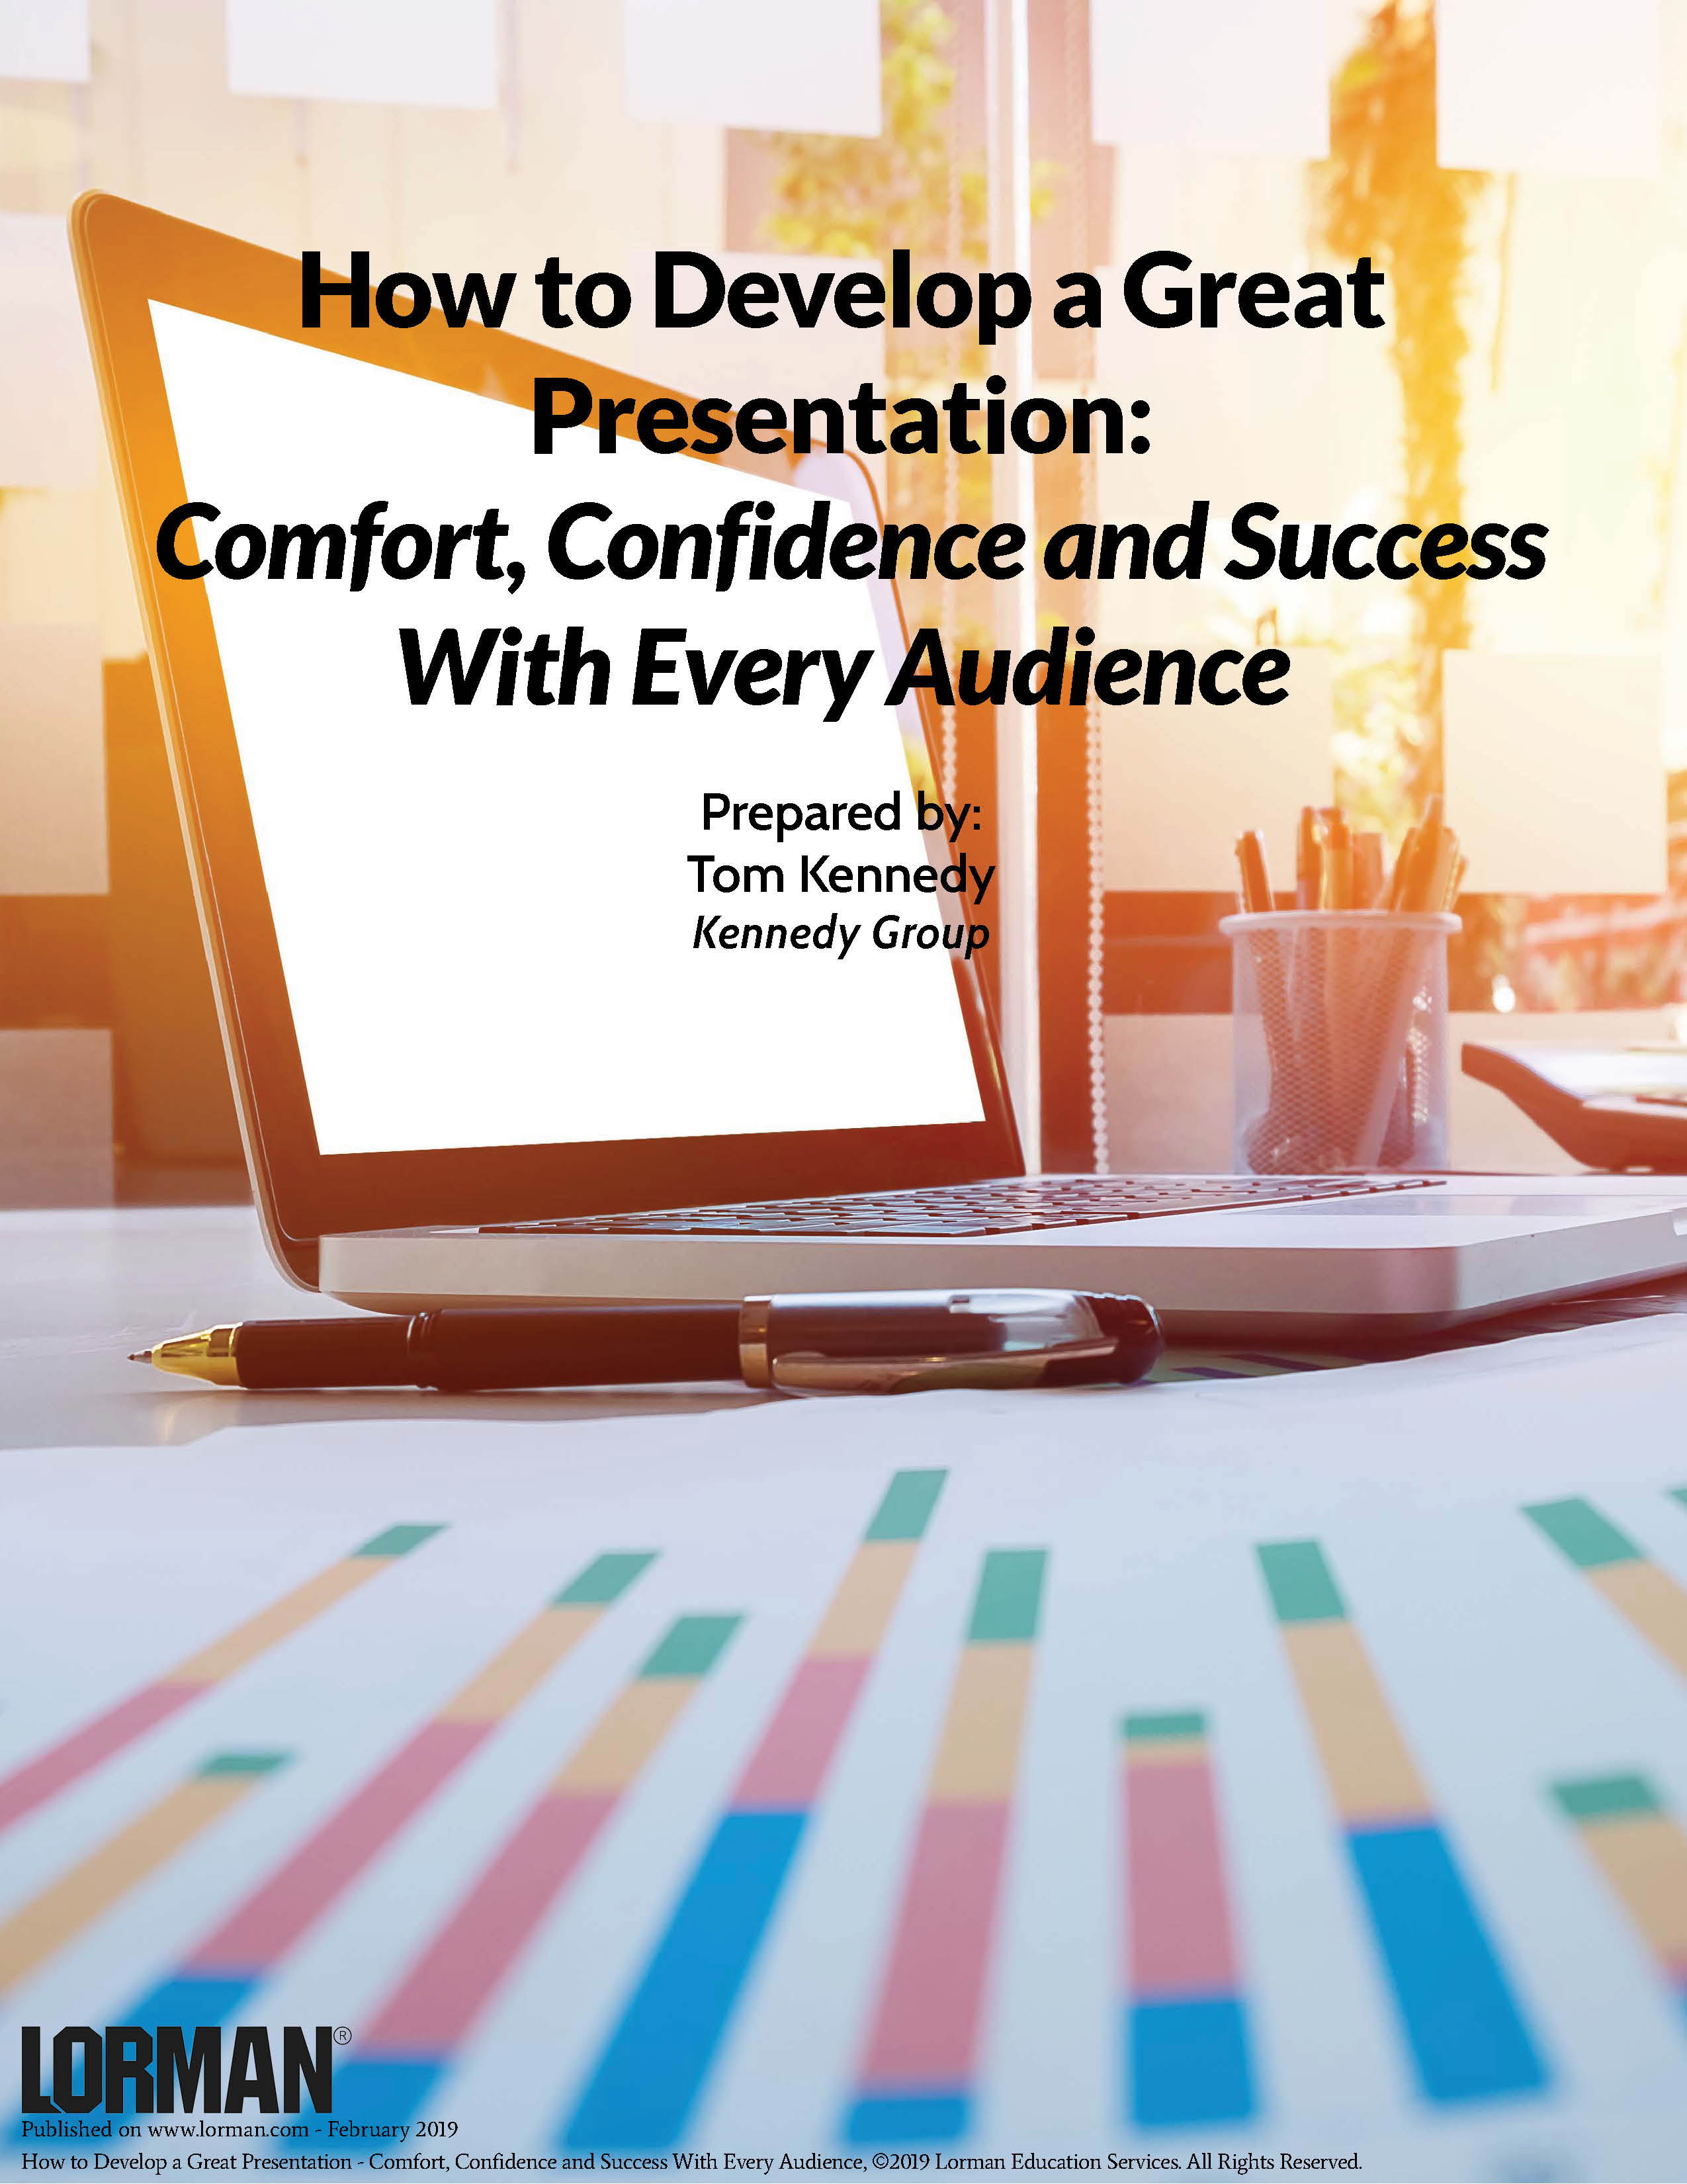 How to Develop a Great Presentation - Comfort, Confidence and Success With Every Audience